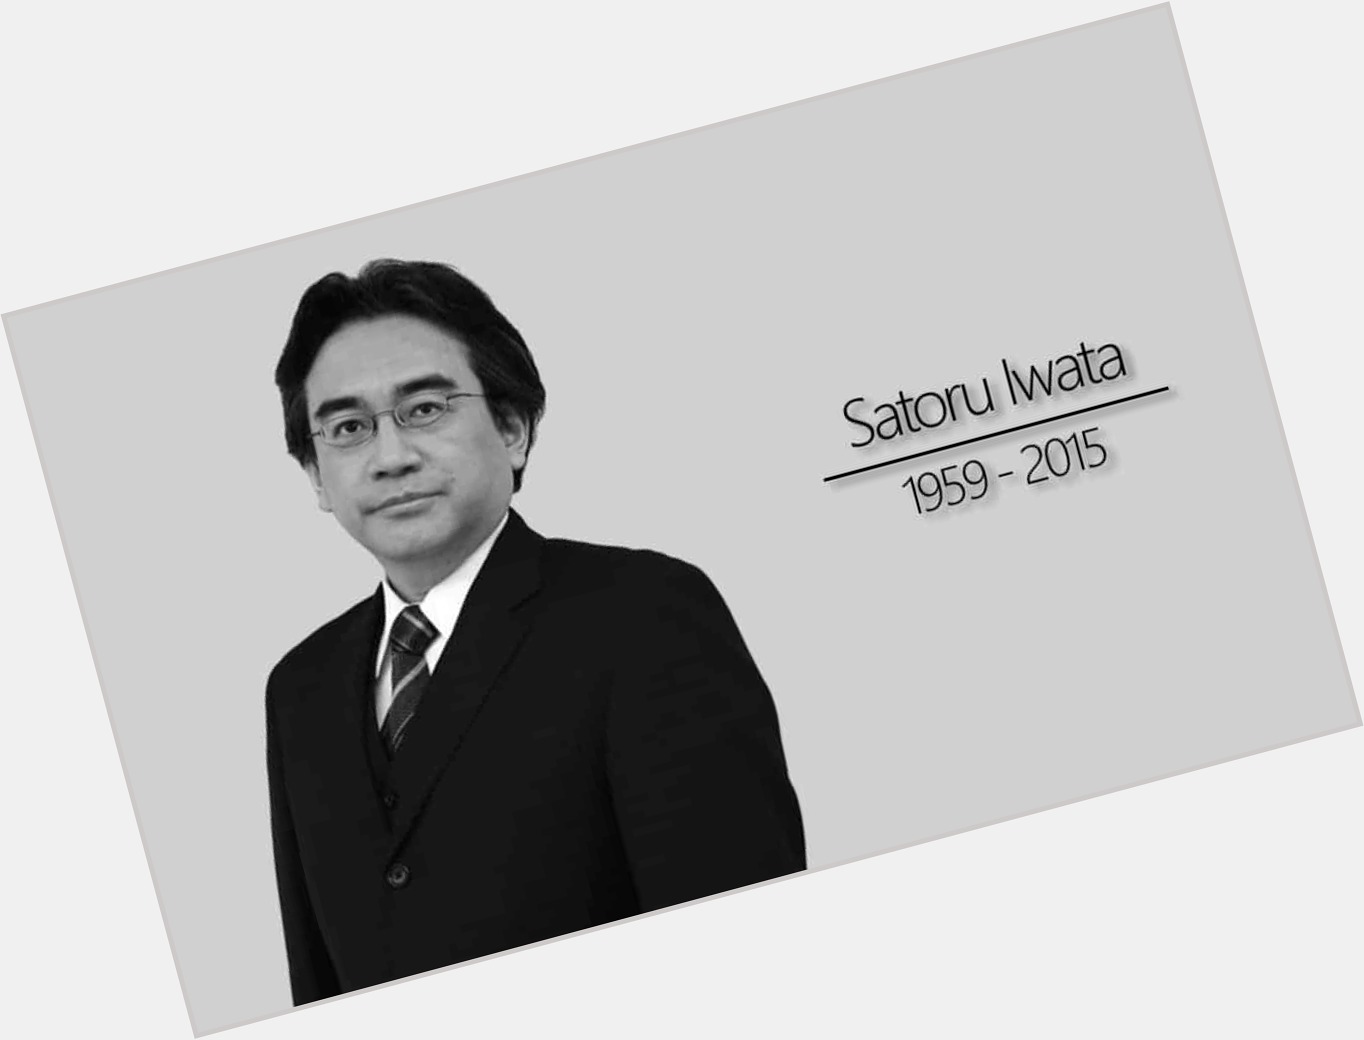 Happy Birthday Satoru Iwata, Nintendo will never have anybody that cares about games and the players more than you 